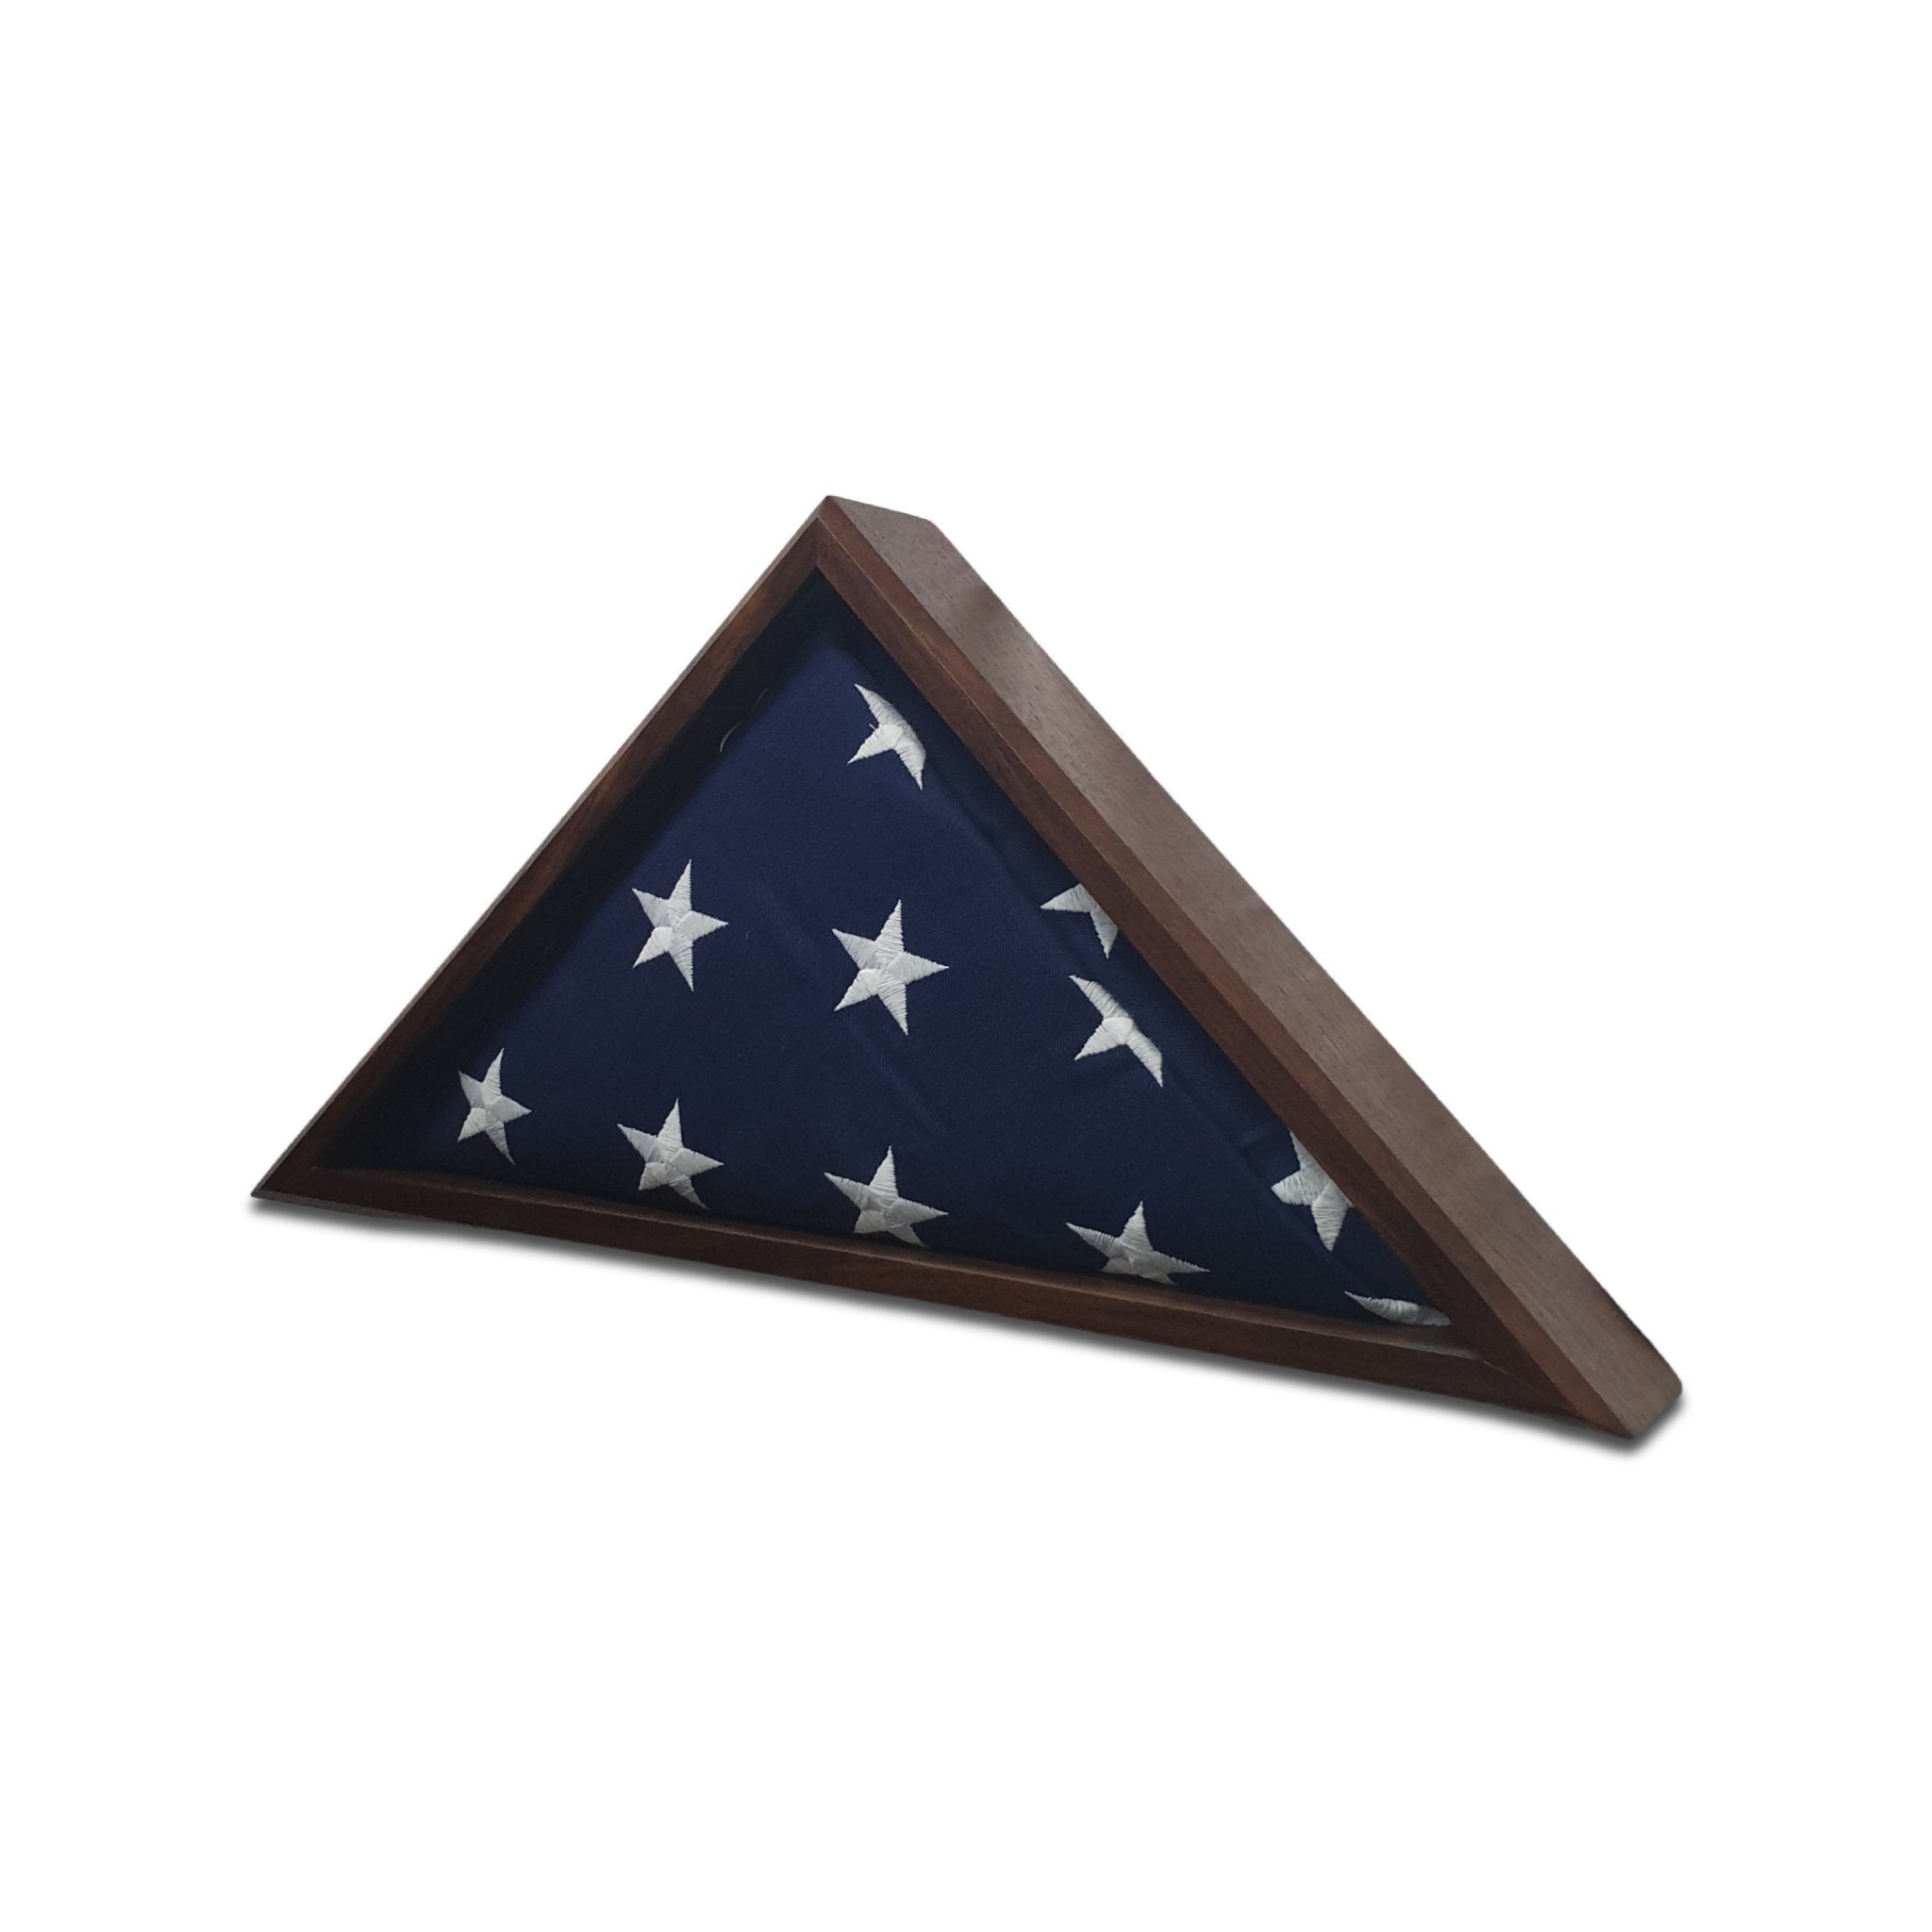 Walnut 4'x6' Flag Display case made out of real Walnut hardwood and glass, shown with a 4'x6' folded American flag.